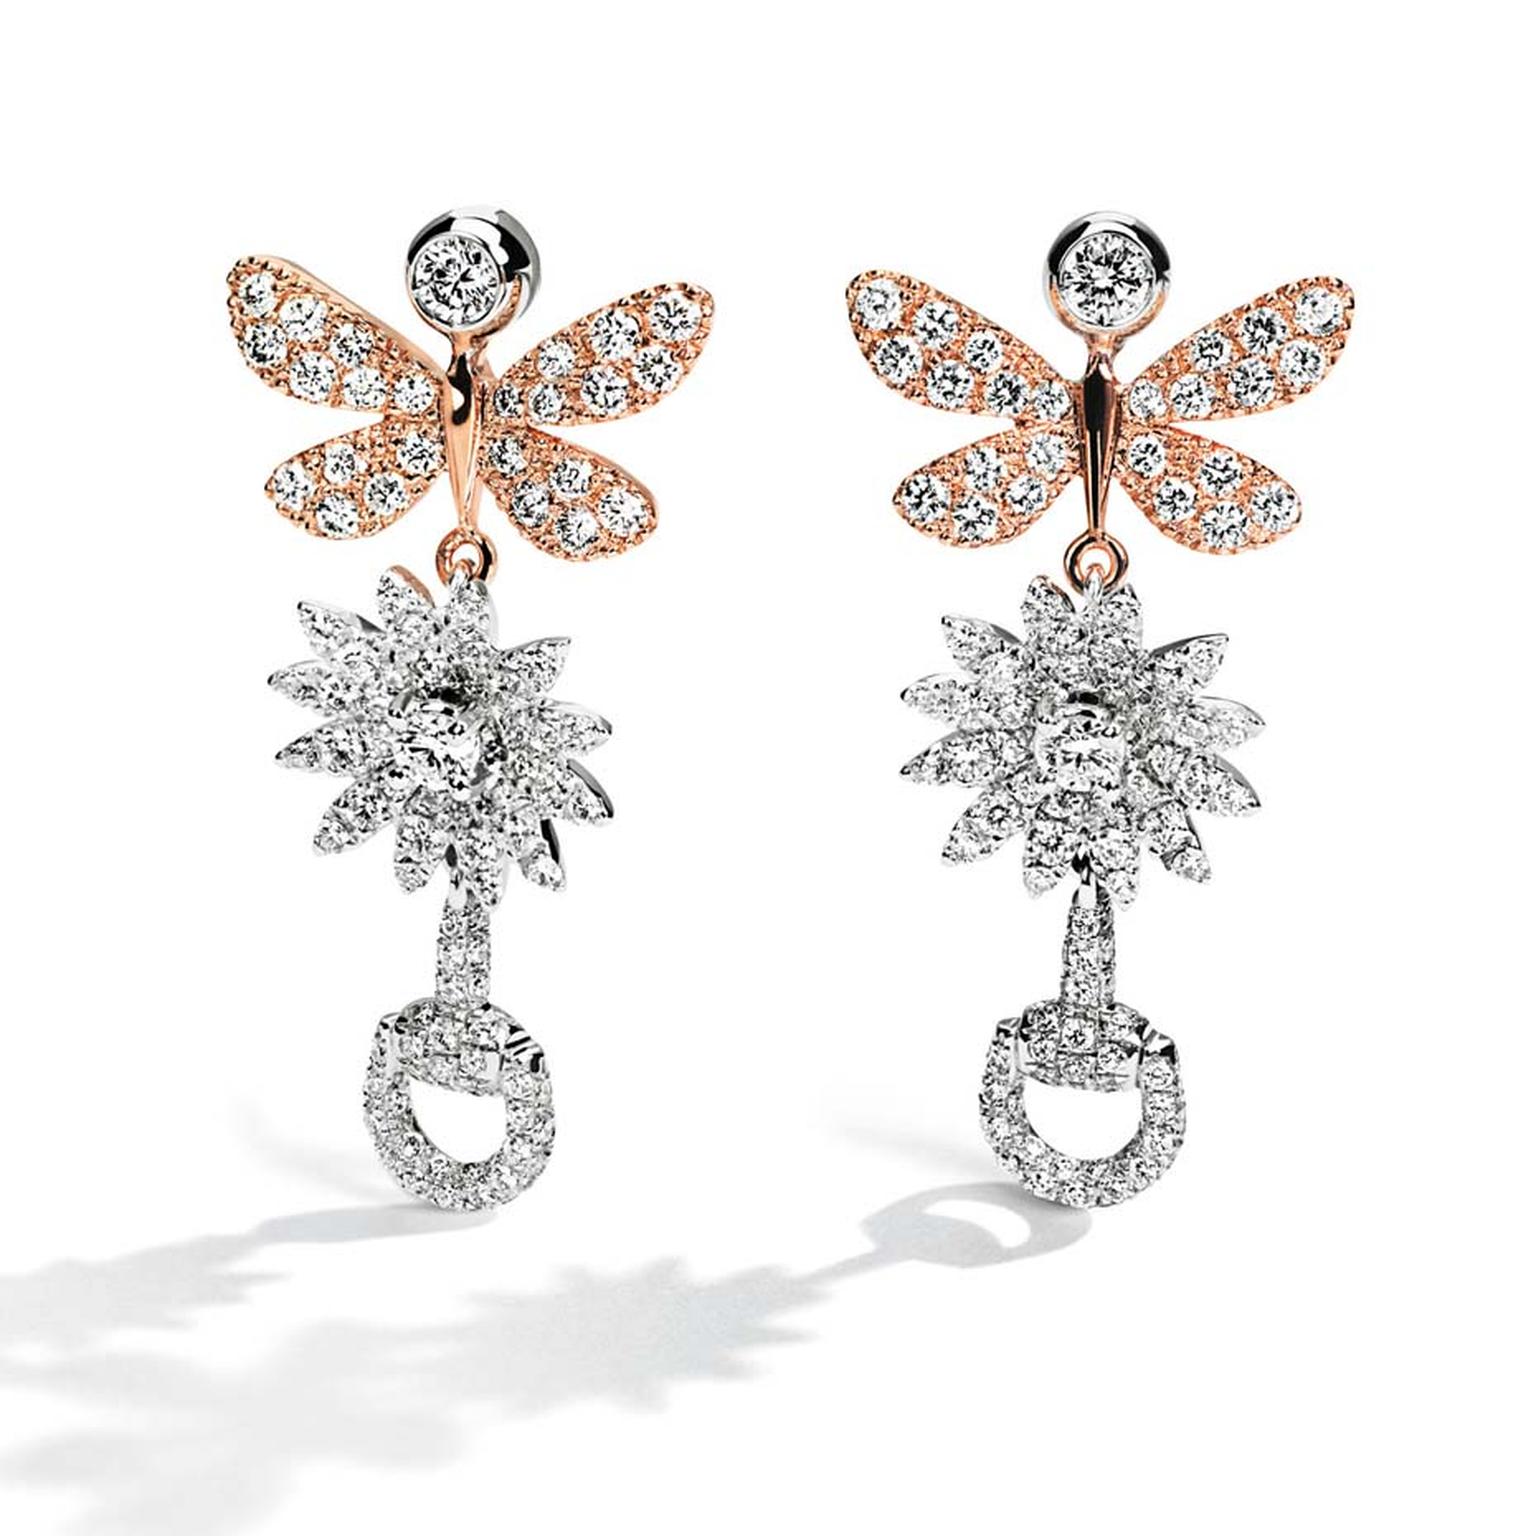 Butterfly jewellery_Basel_Gucci_Rose gold and white gold diamond butterfly drop earrings.jpg